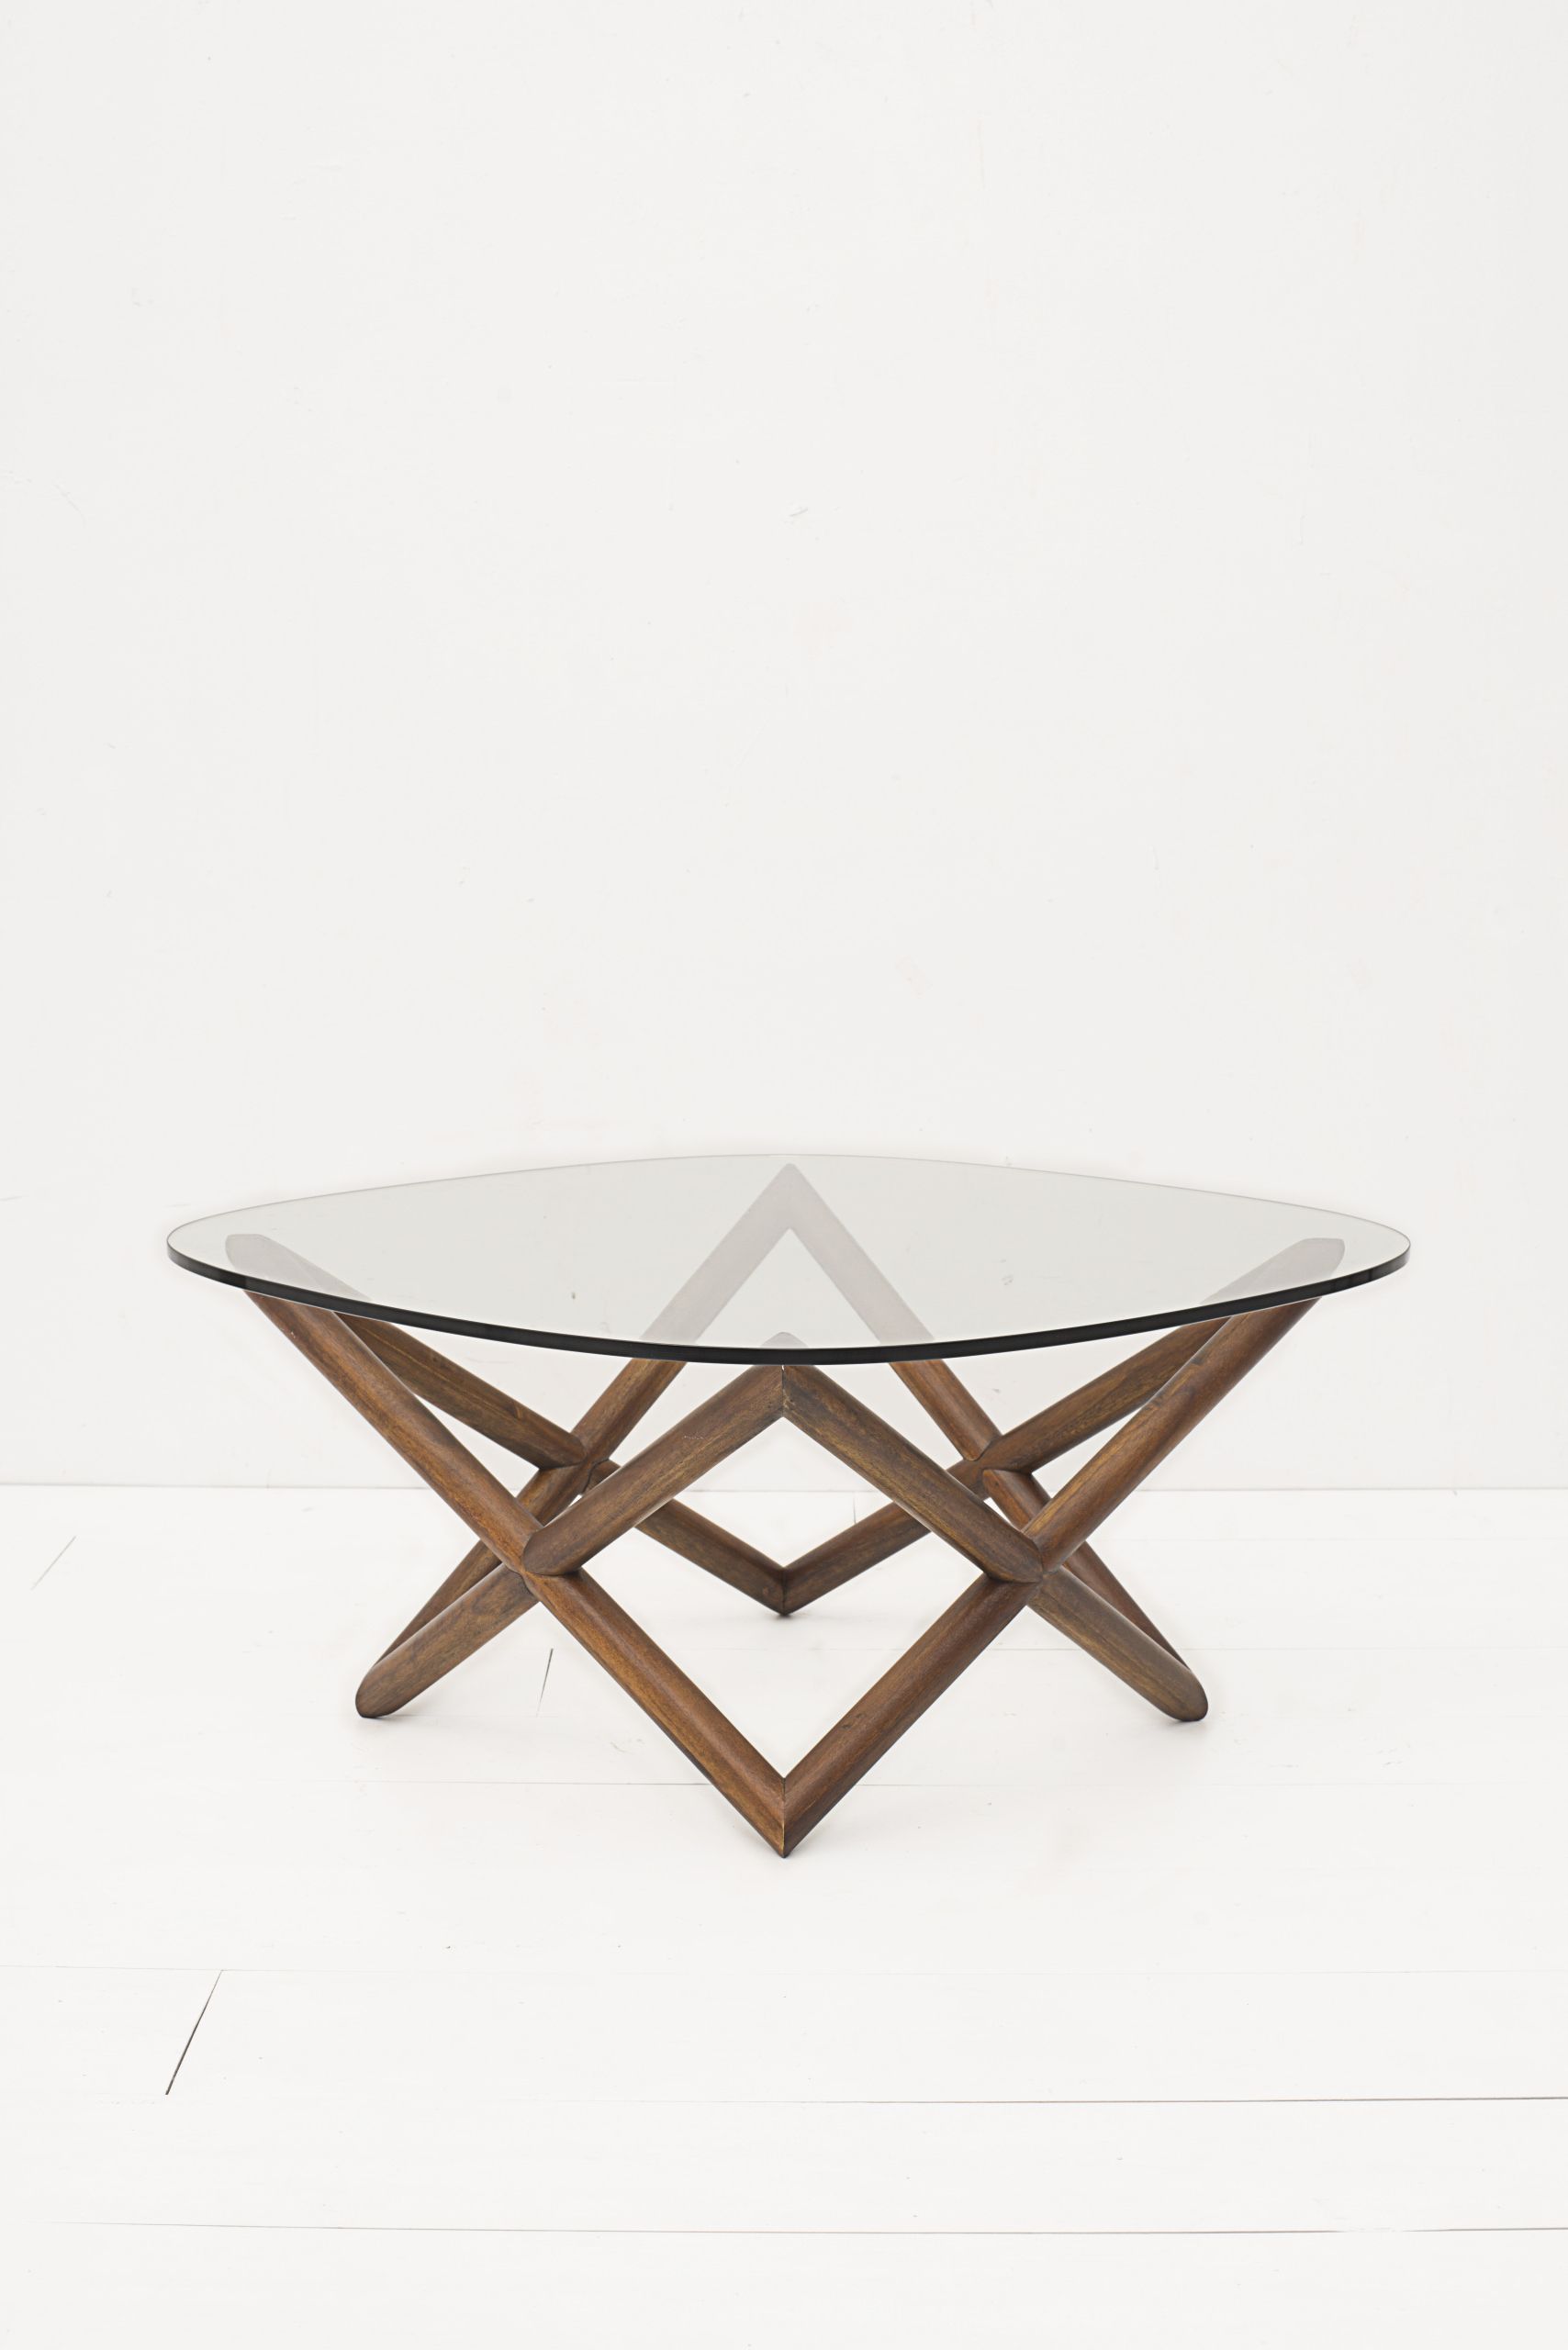 Geometric Coffee Tables With Most Recently Released Geometric Coffee Table T (View 8 of 20)